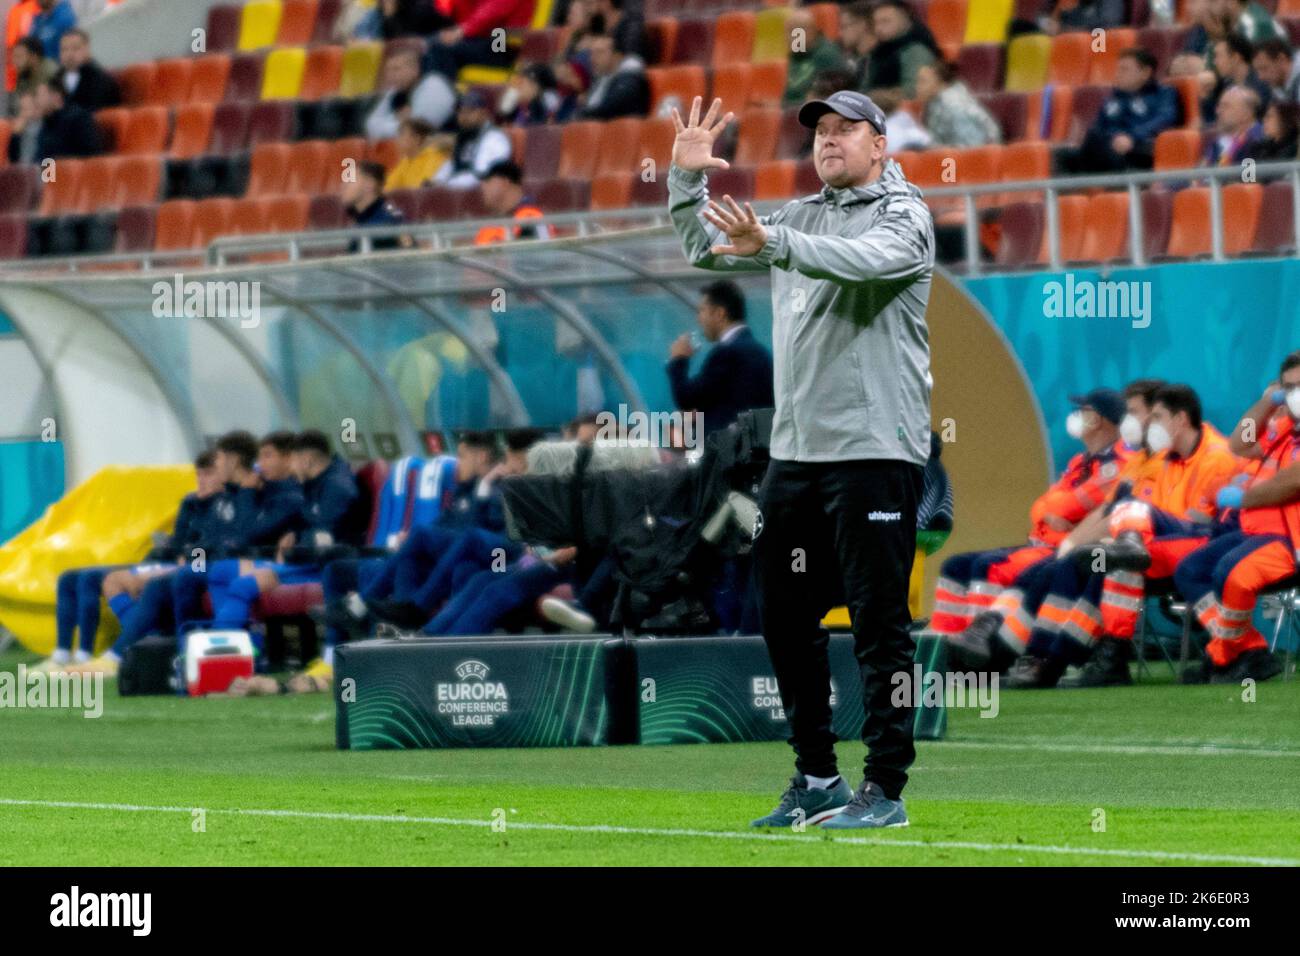 Bucharest, Romania. 13th Oct, 2022. October 13, 2022: Kent Nielsen the head coach of Silkeborg IF during of the UEFA Europa Conference League group B match between FCSB Bucharest and Silkeborg IF at National Arena Stadium in Bucharest, Romania ROU. Catalin Soare/Cronos Credit: Cronos/Alamy Live News Stock Photo